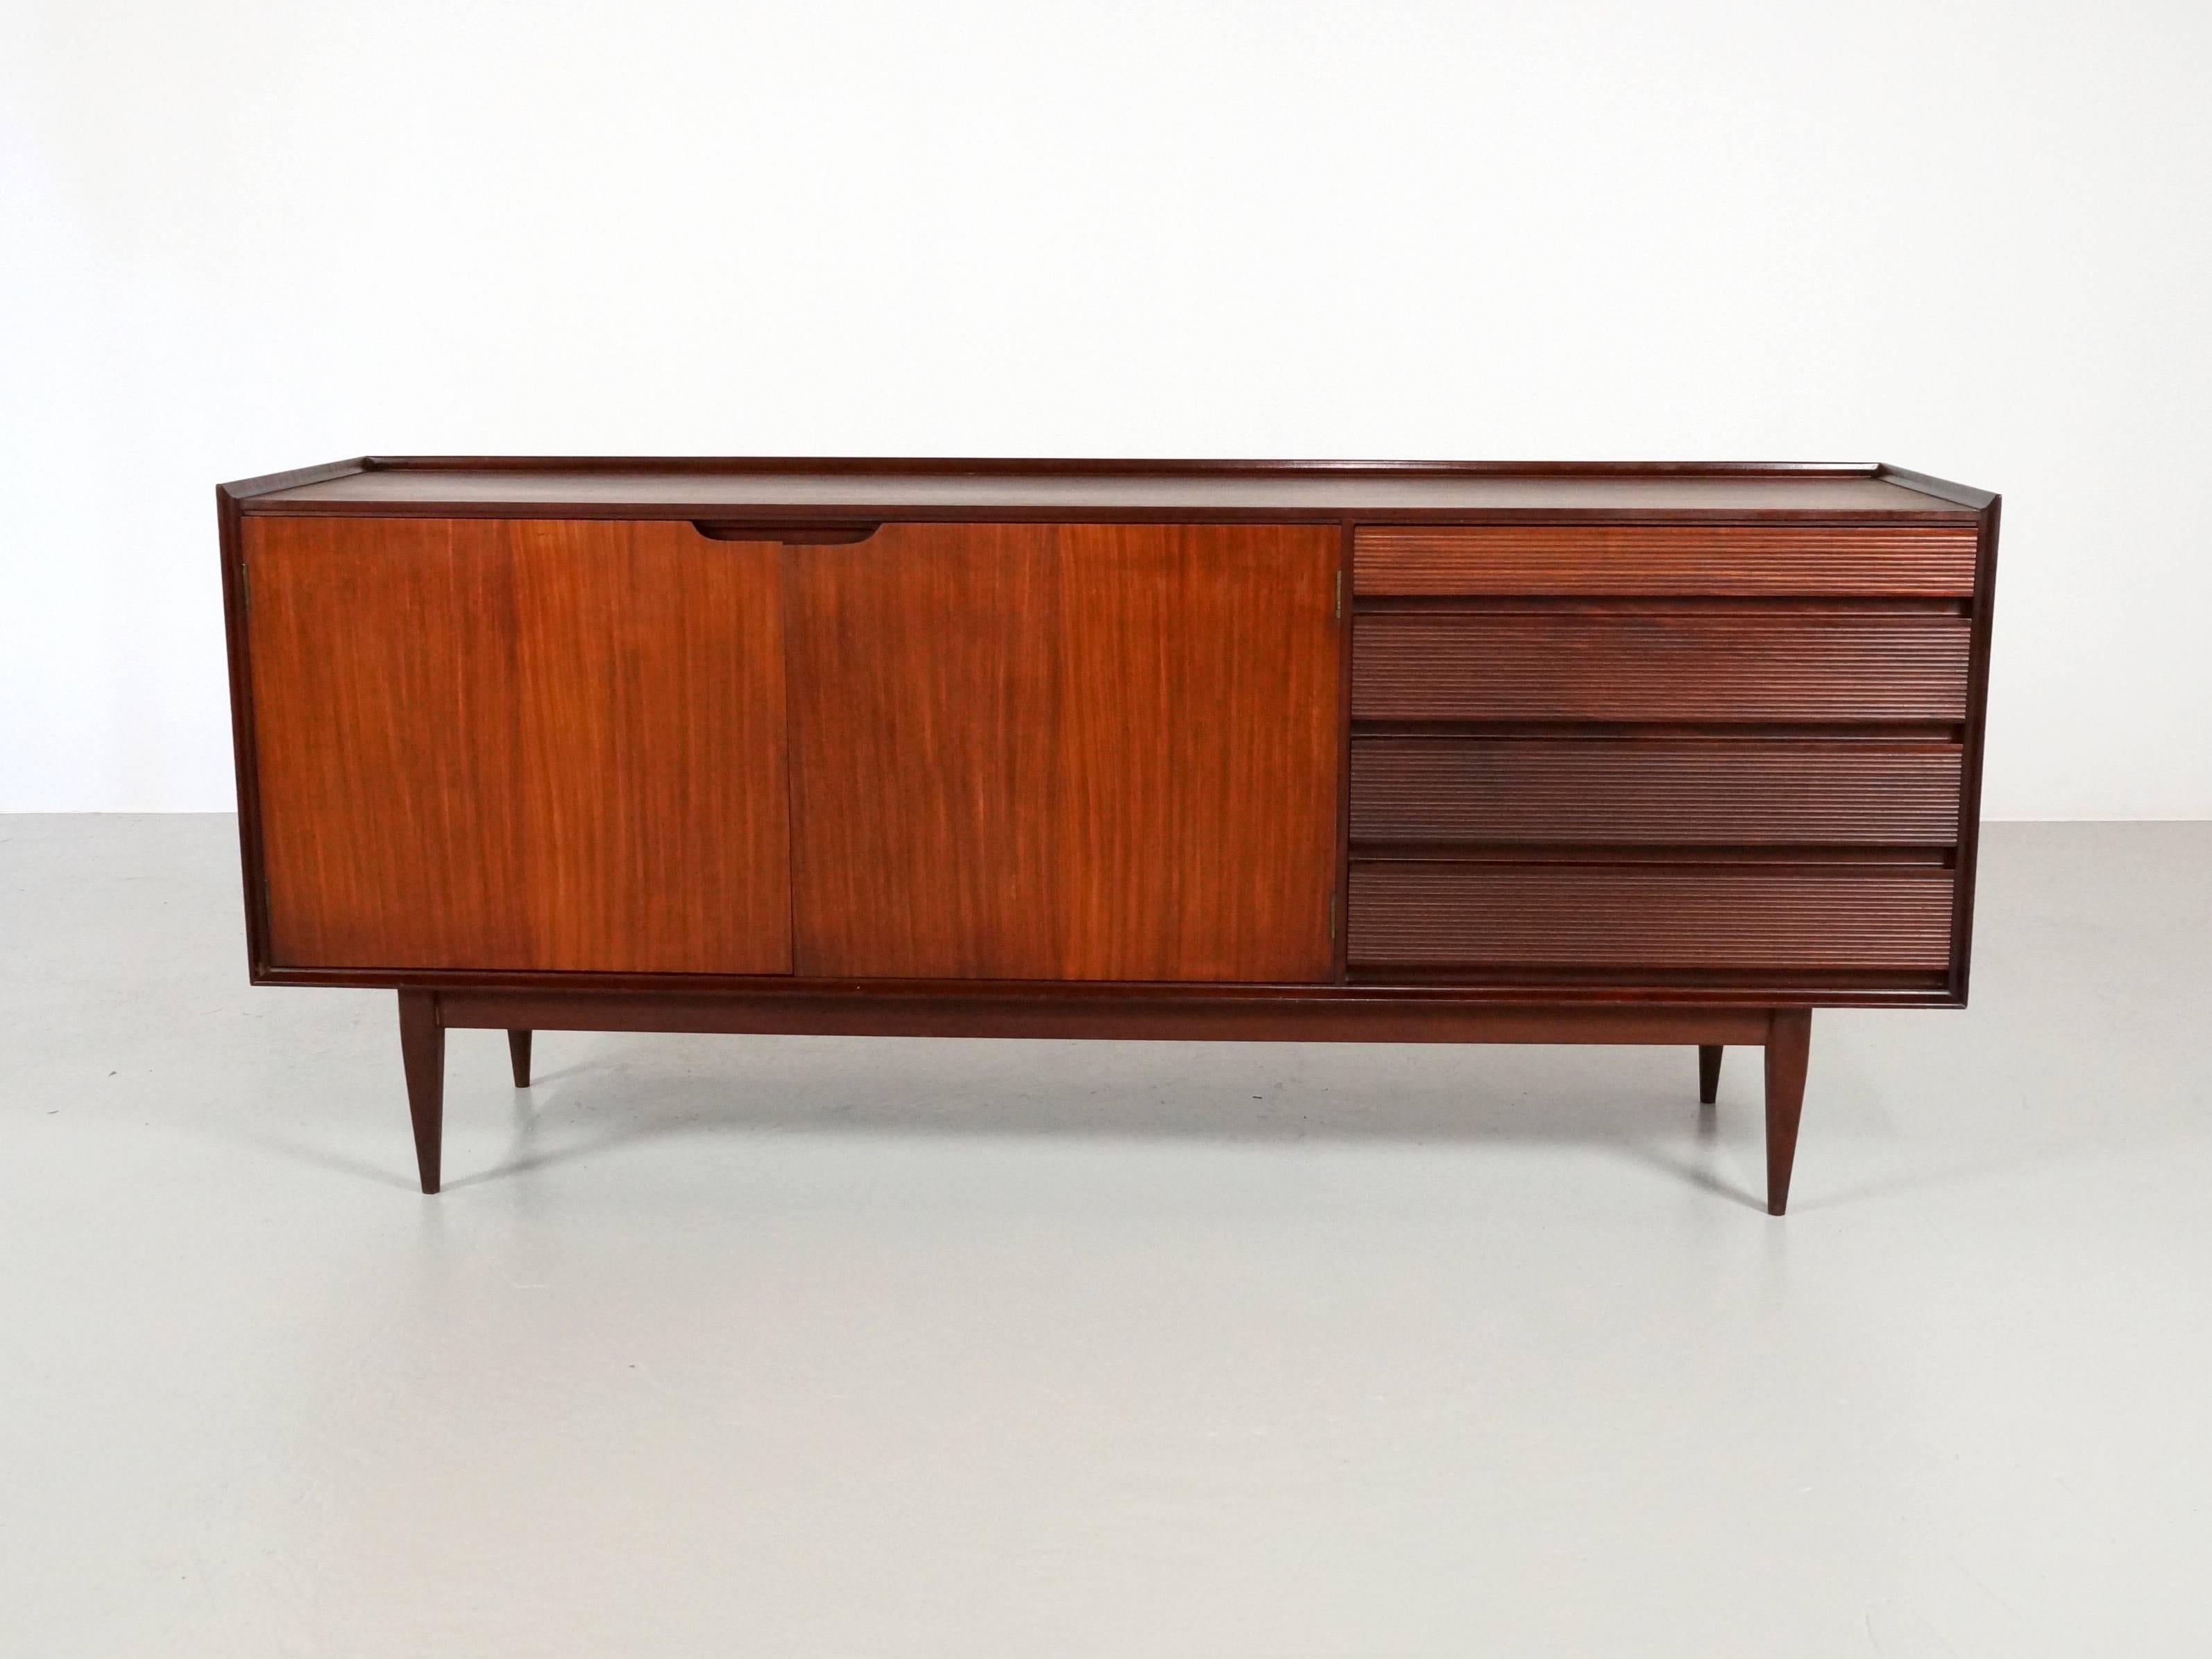 Stunning mid century sideboard designed by Richard Hornby and manufactured by Fyne Ladye furniture in the 1960s for sale in high end furniture stores such as Heals. 
It is made from solid Afromosia (no veneer) and is an exquisite example of British